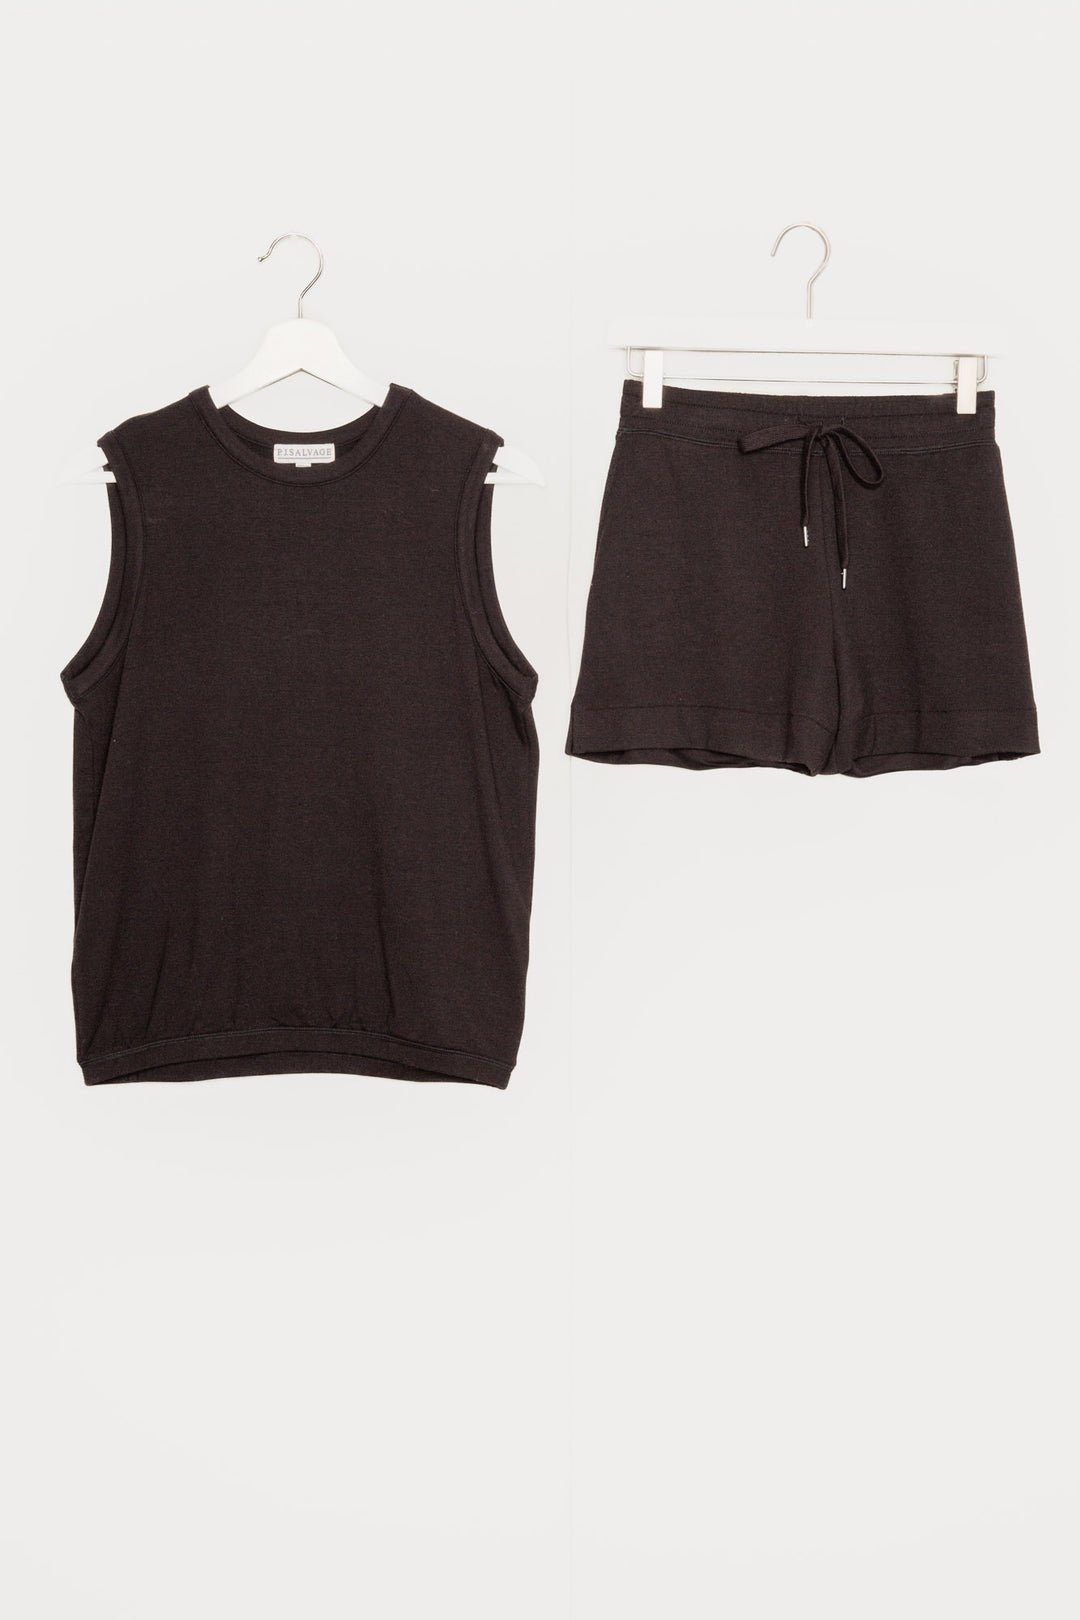 Black short set in baby French Terry knit. Sleeveless top with banded hem & pocket short. (7189030338660)